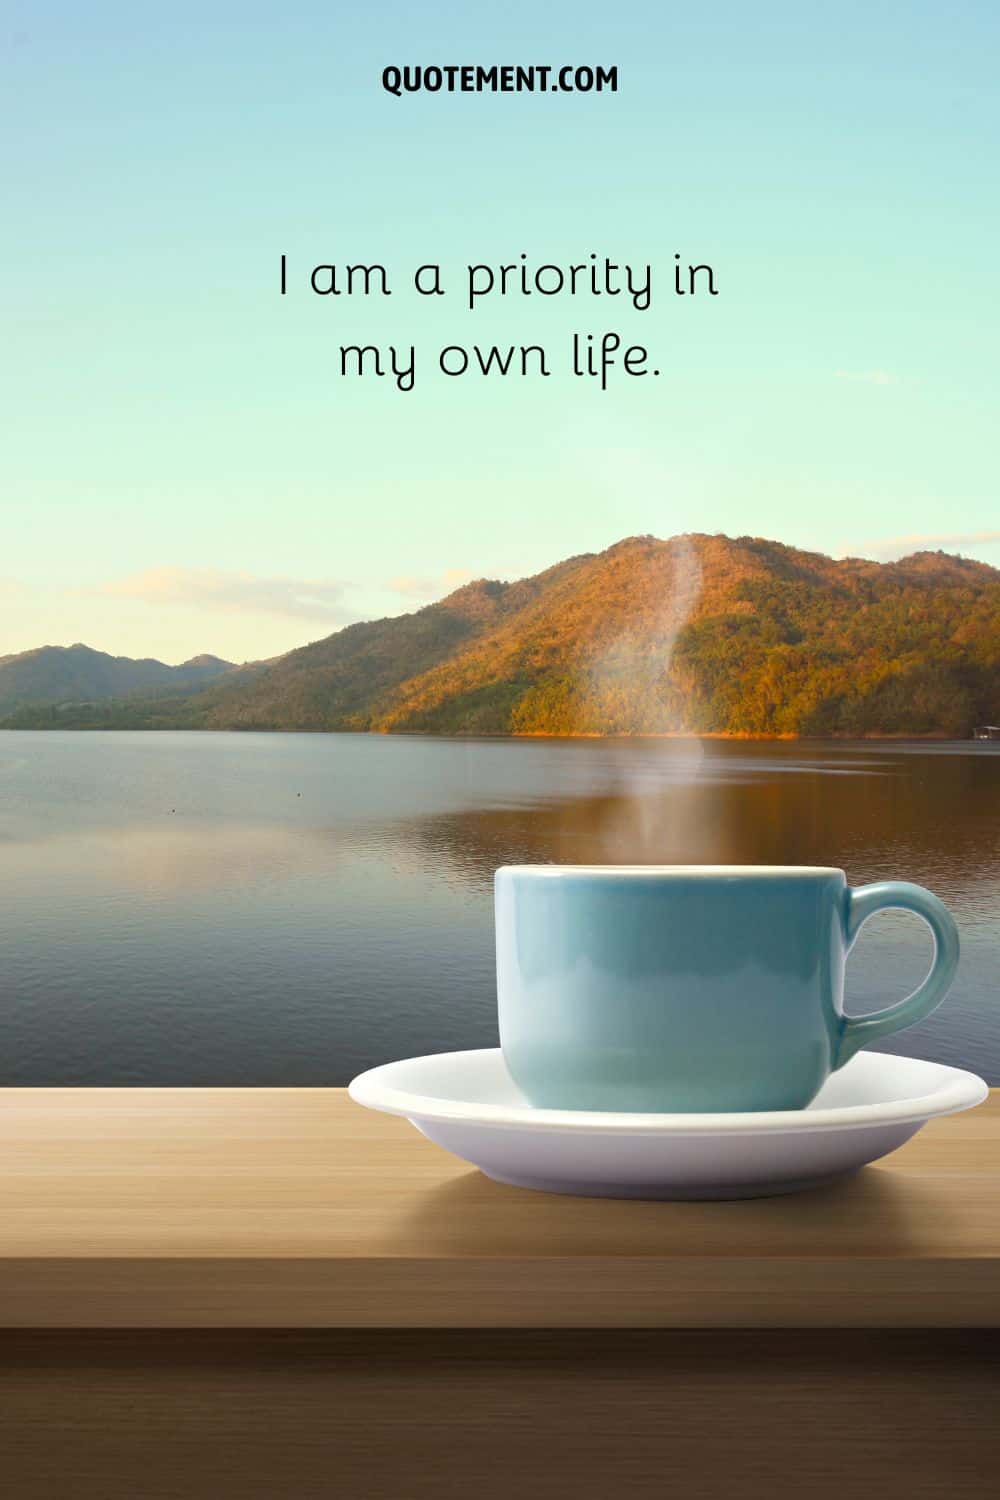 I am a priority in my own life